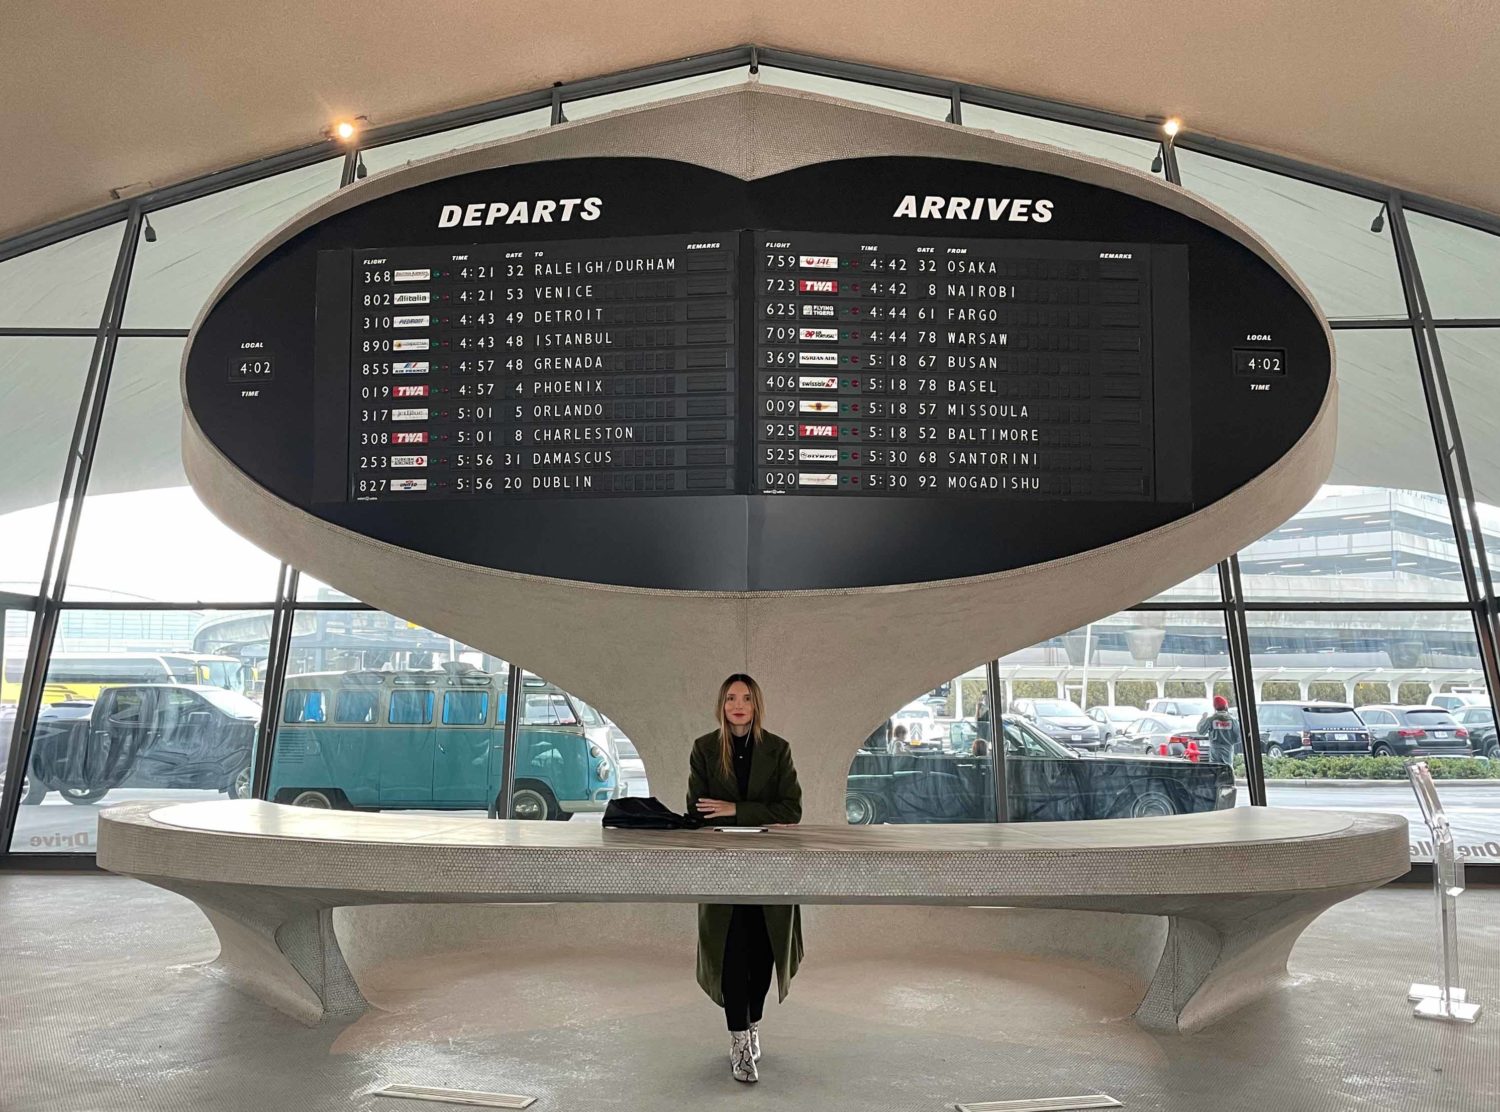 TWA Hotel The flapping of the old-school timetable is so nostalgic and pretty cool